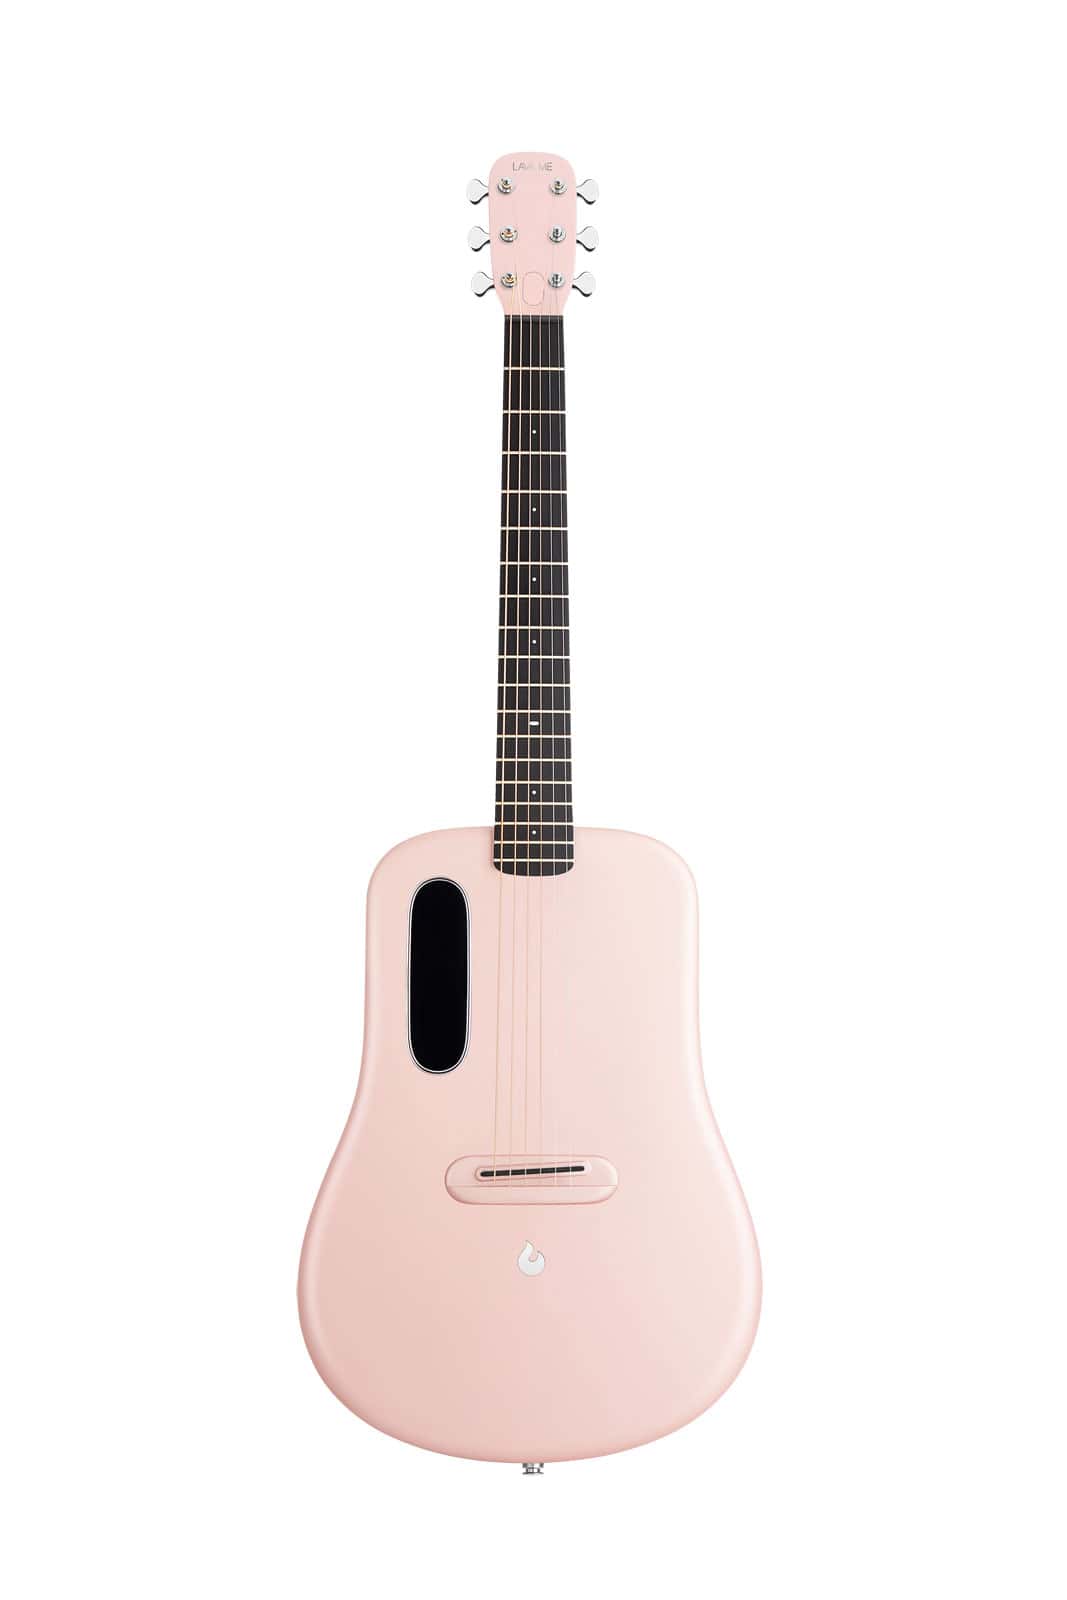 LAVA MUSIC LAVA ME 4 CARBON SERIES 38'' PINK - WITH SPACE BAG - STOCK-B